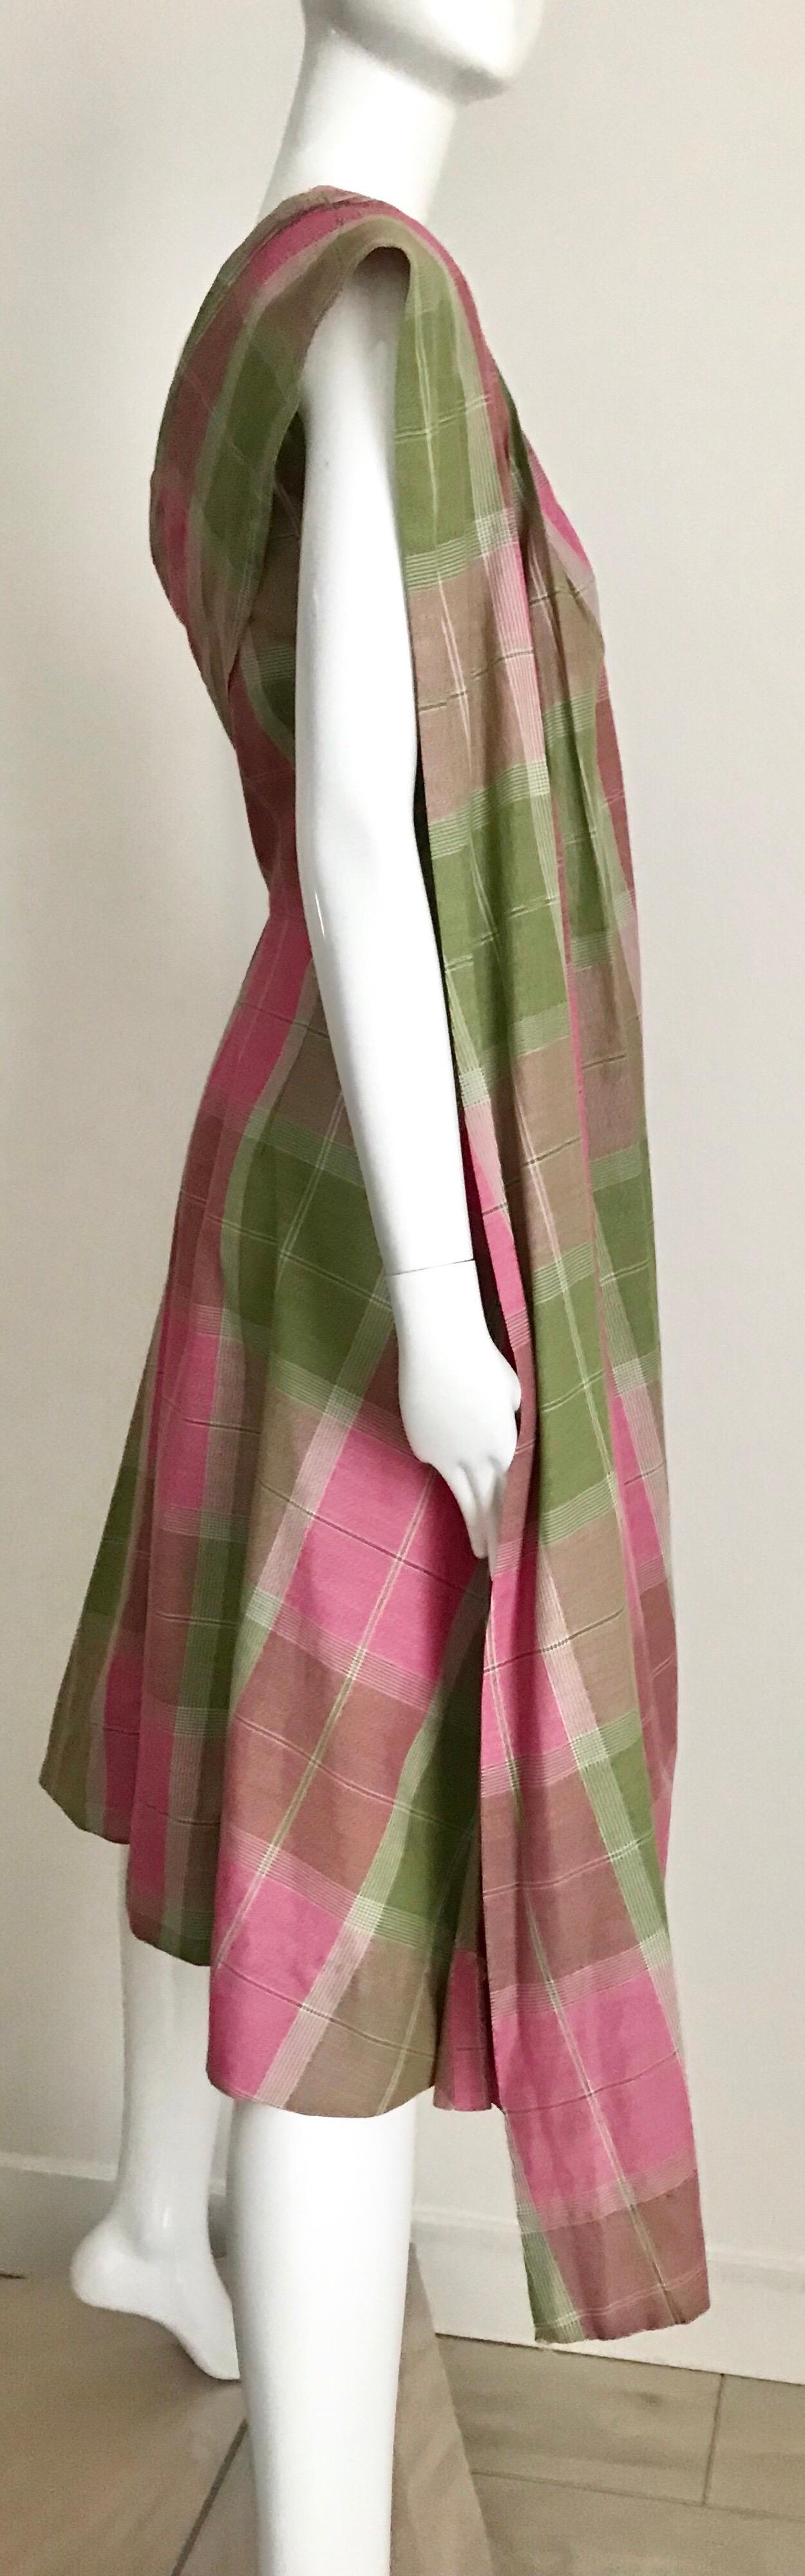 Vintage Tina Lesser Pink and Green Plaid Cotton Dress For Sale 5